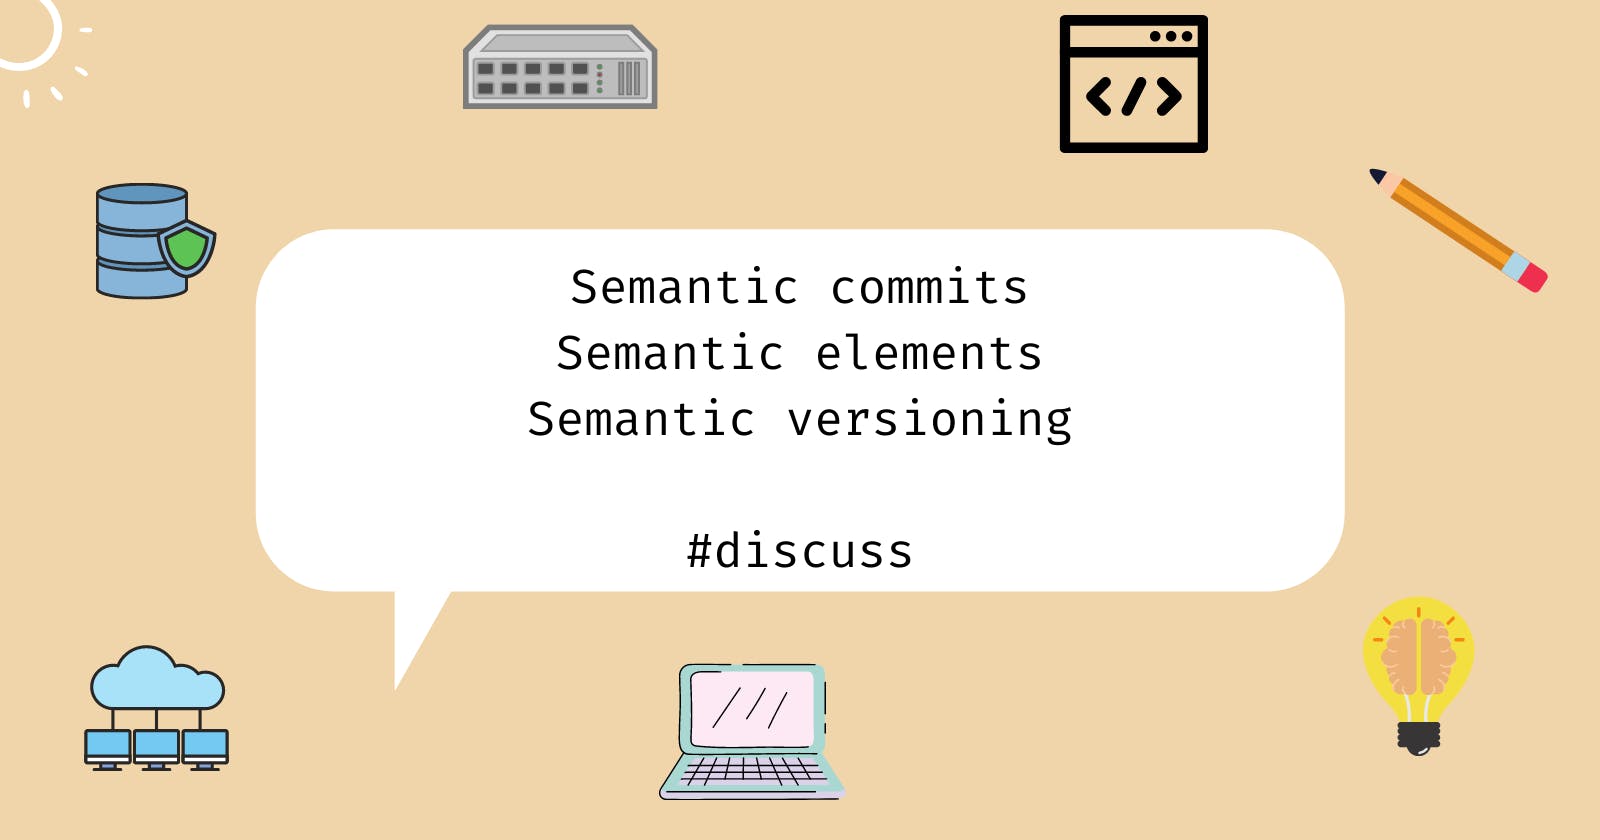 How to organize your code with semantic elements?